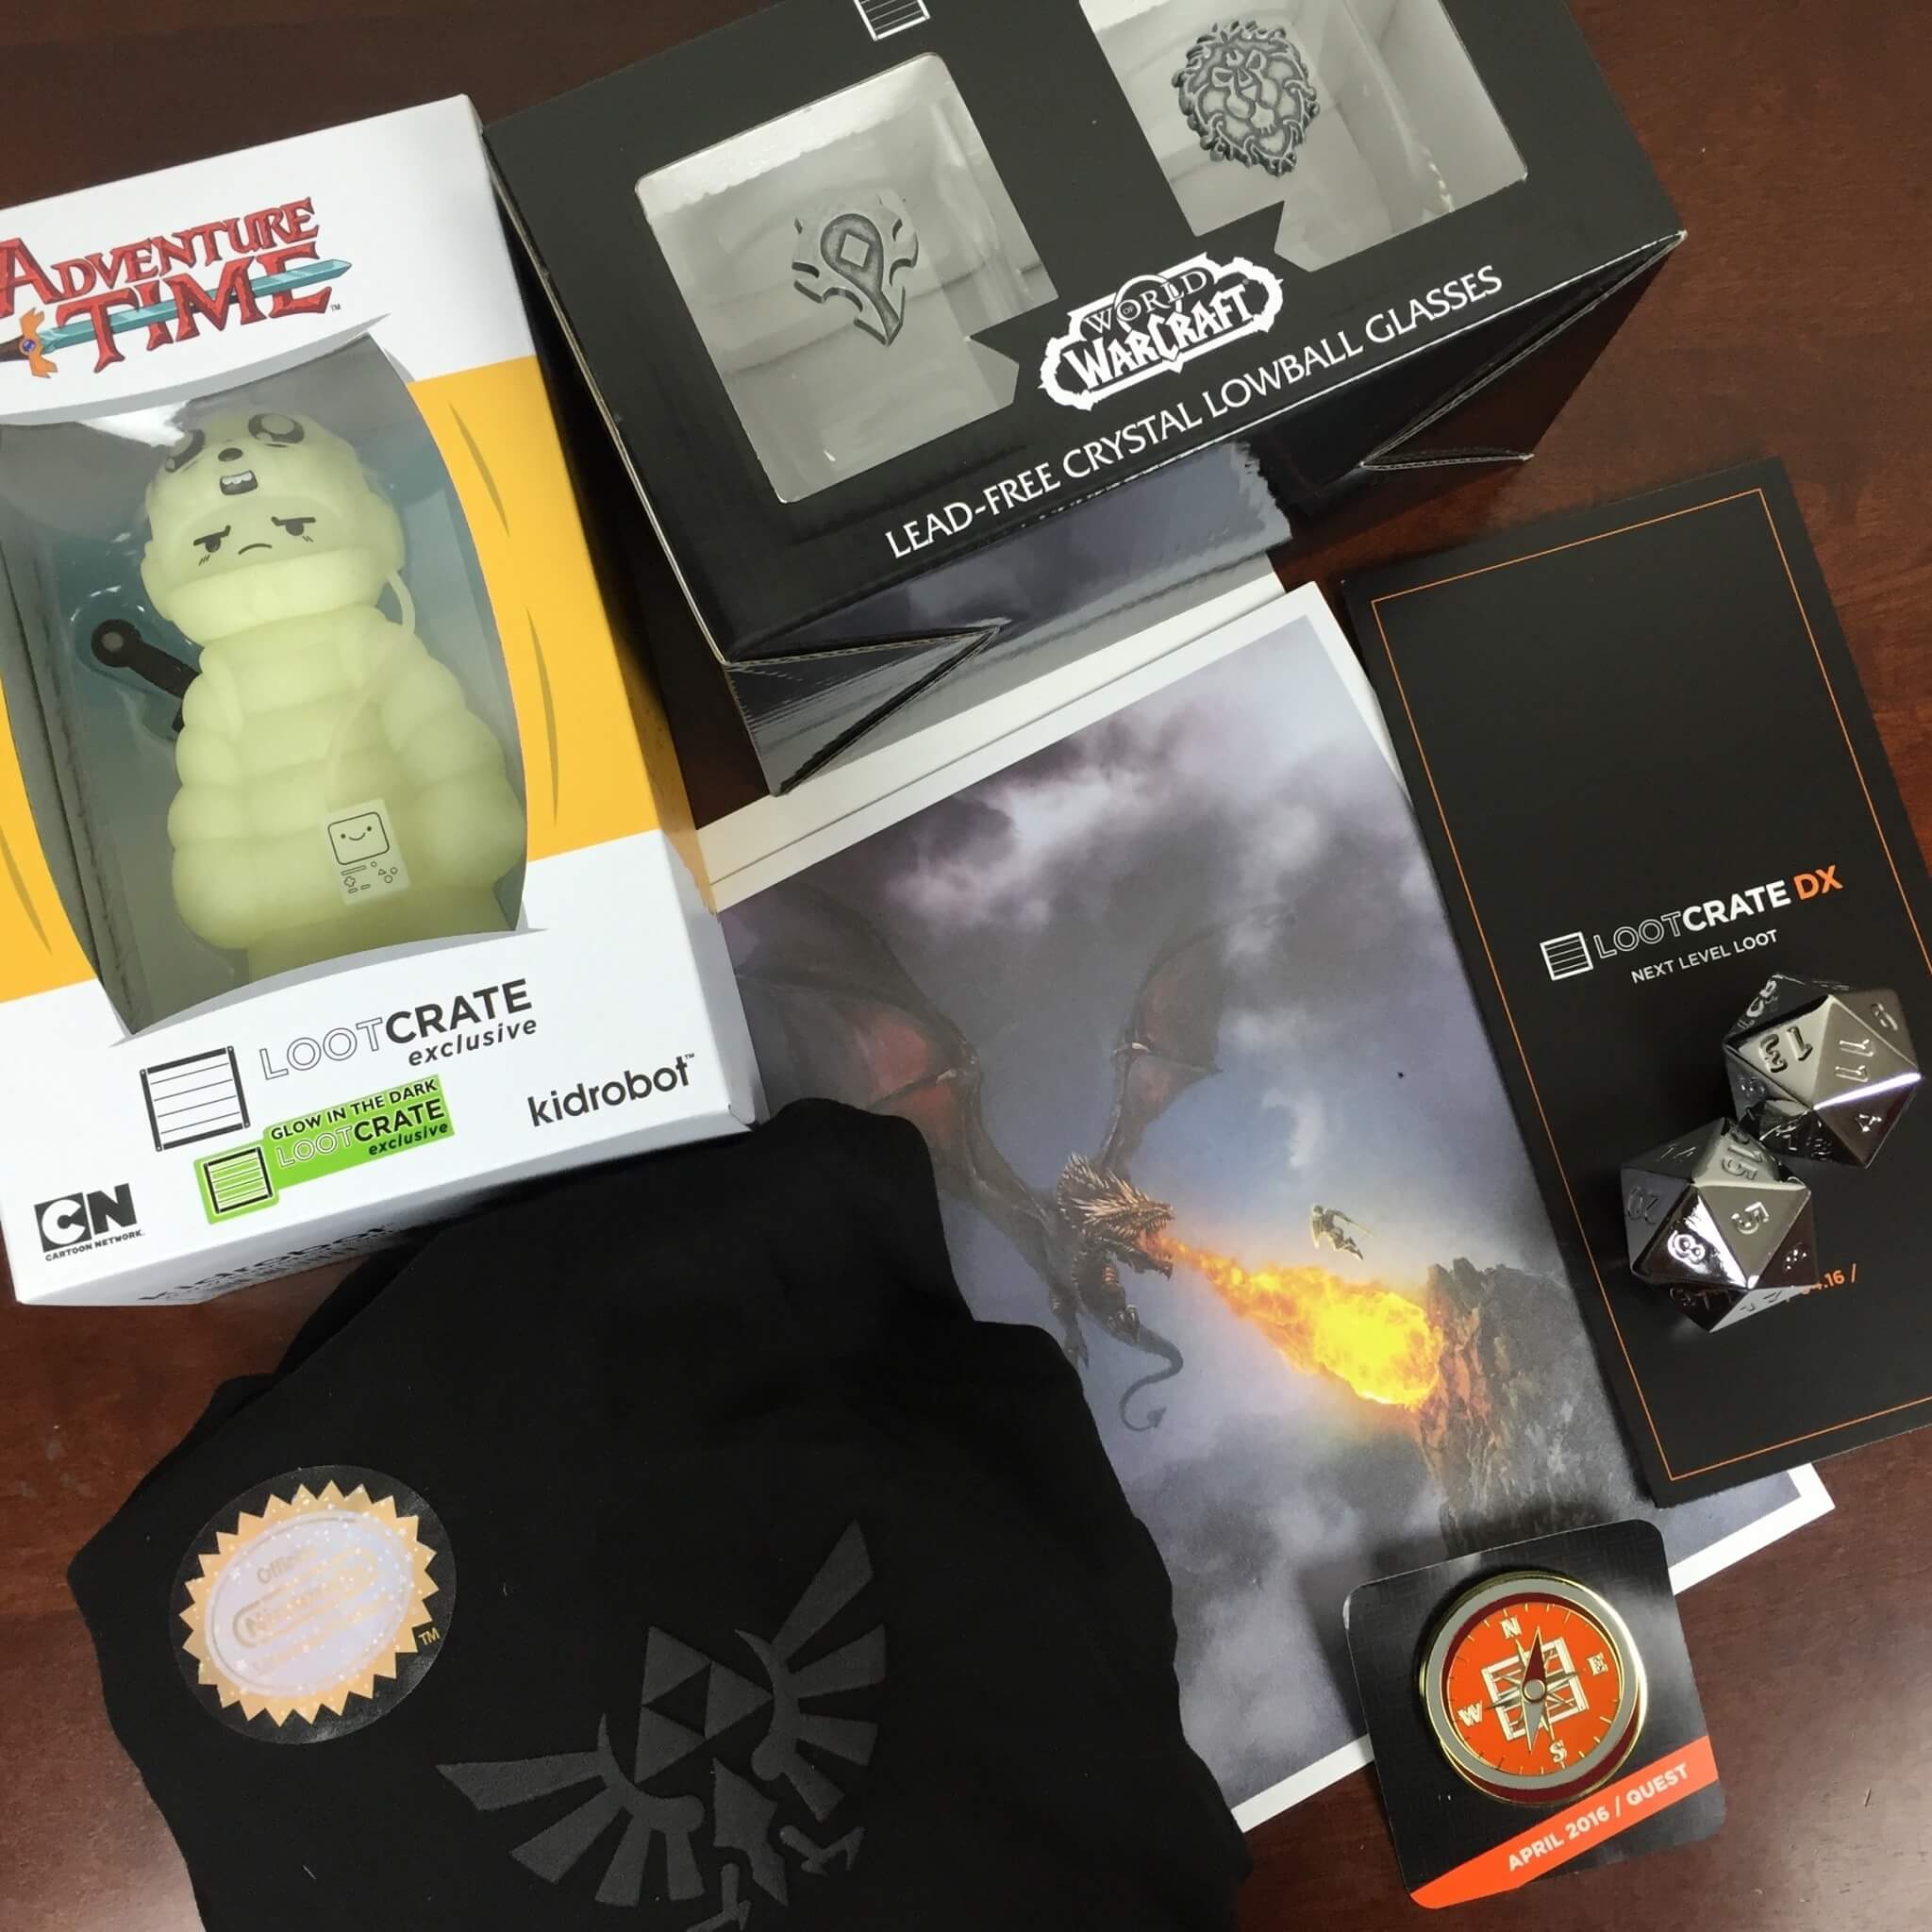 Gallery: Loot Crate 'Quest' April 2016 Box